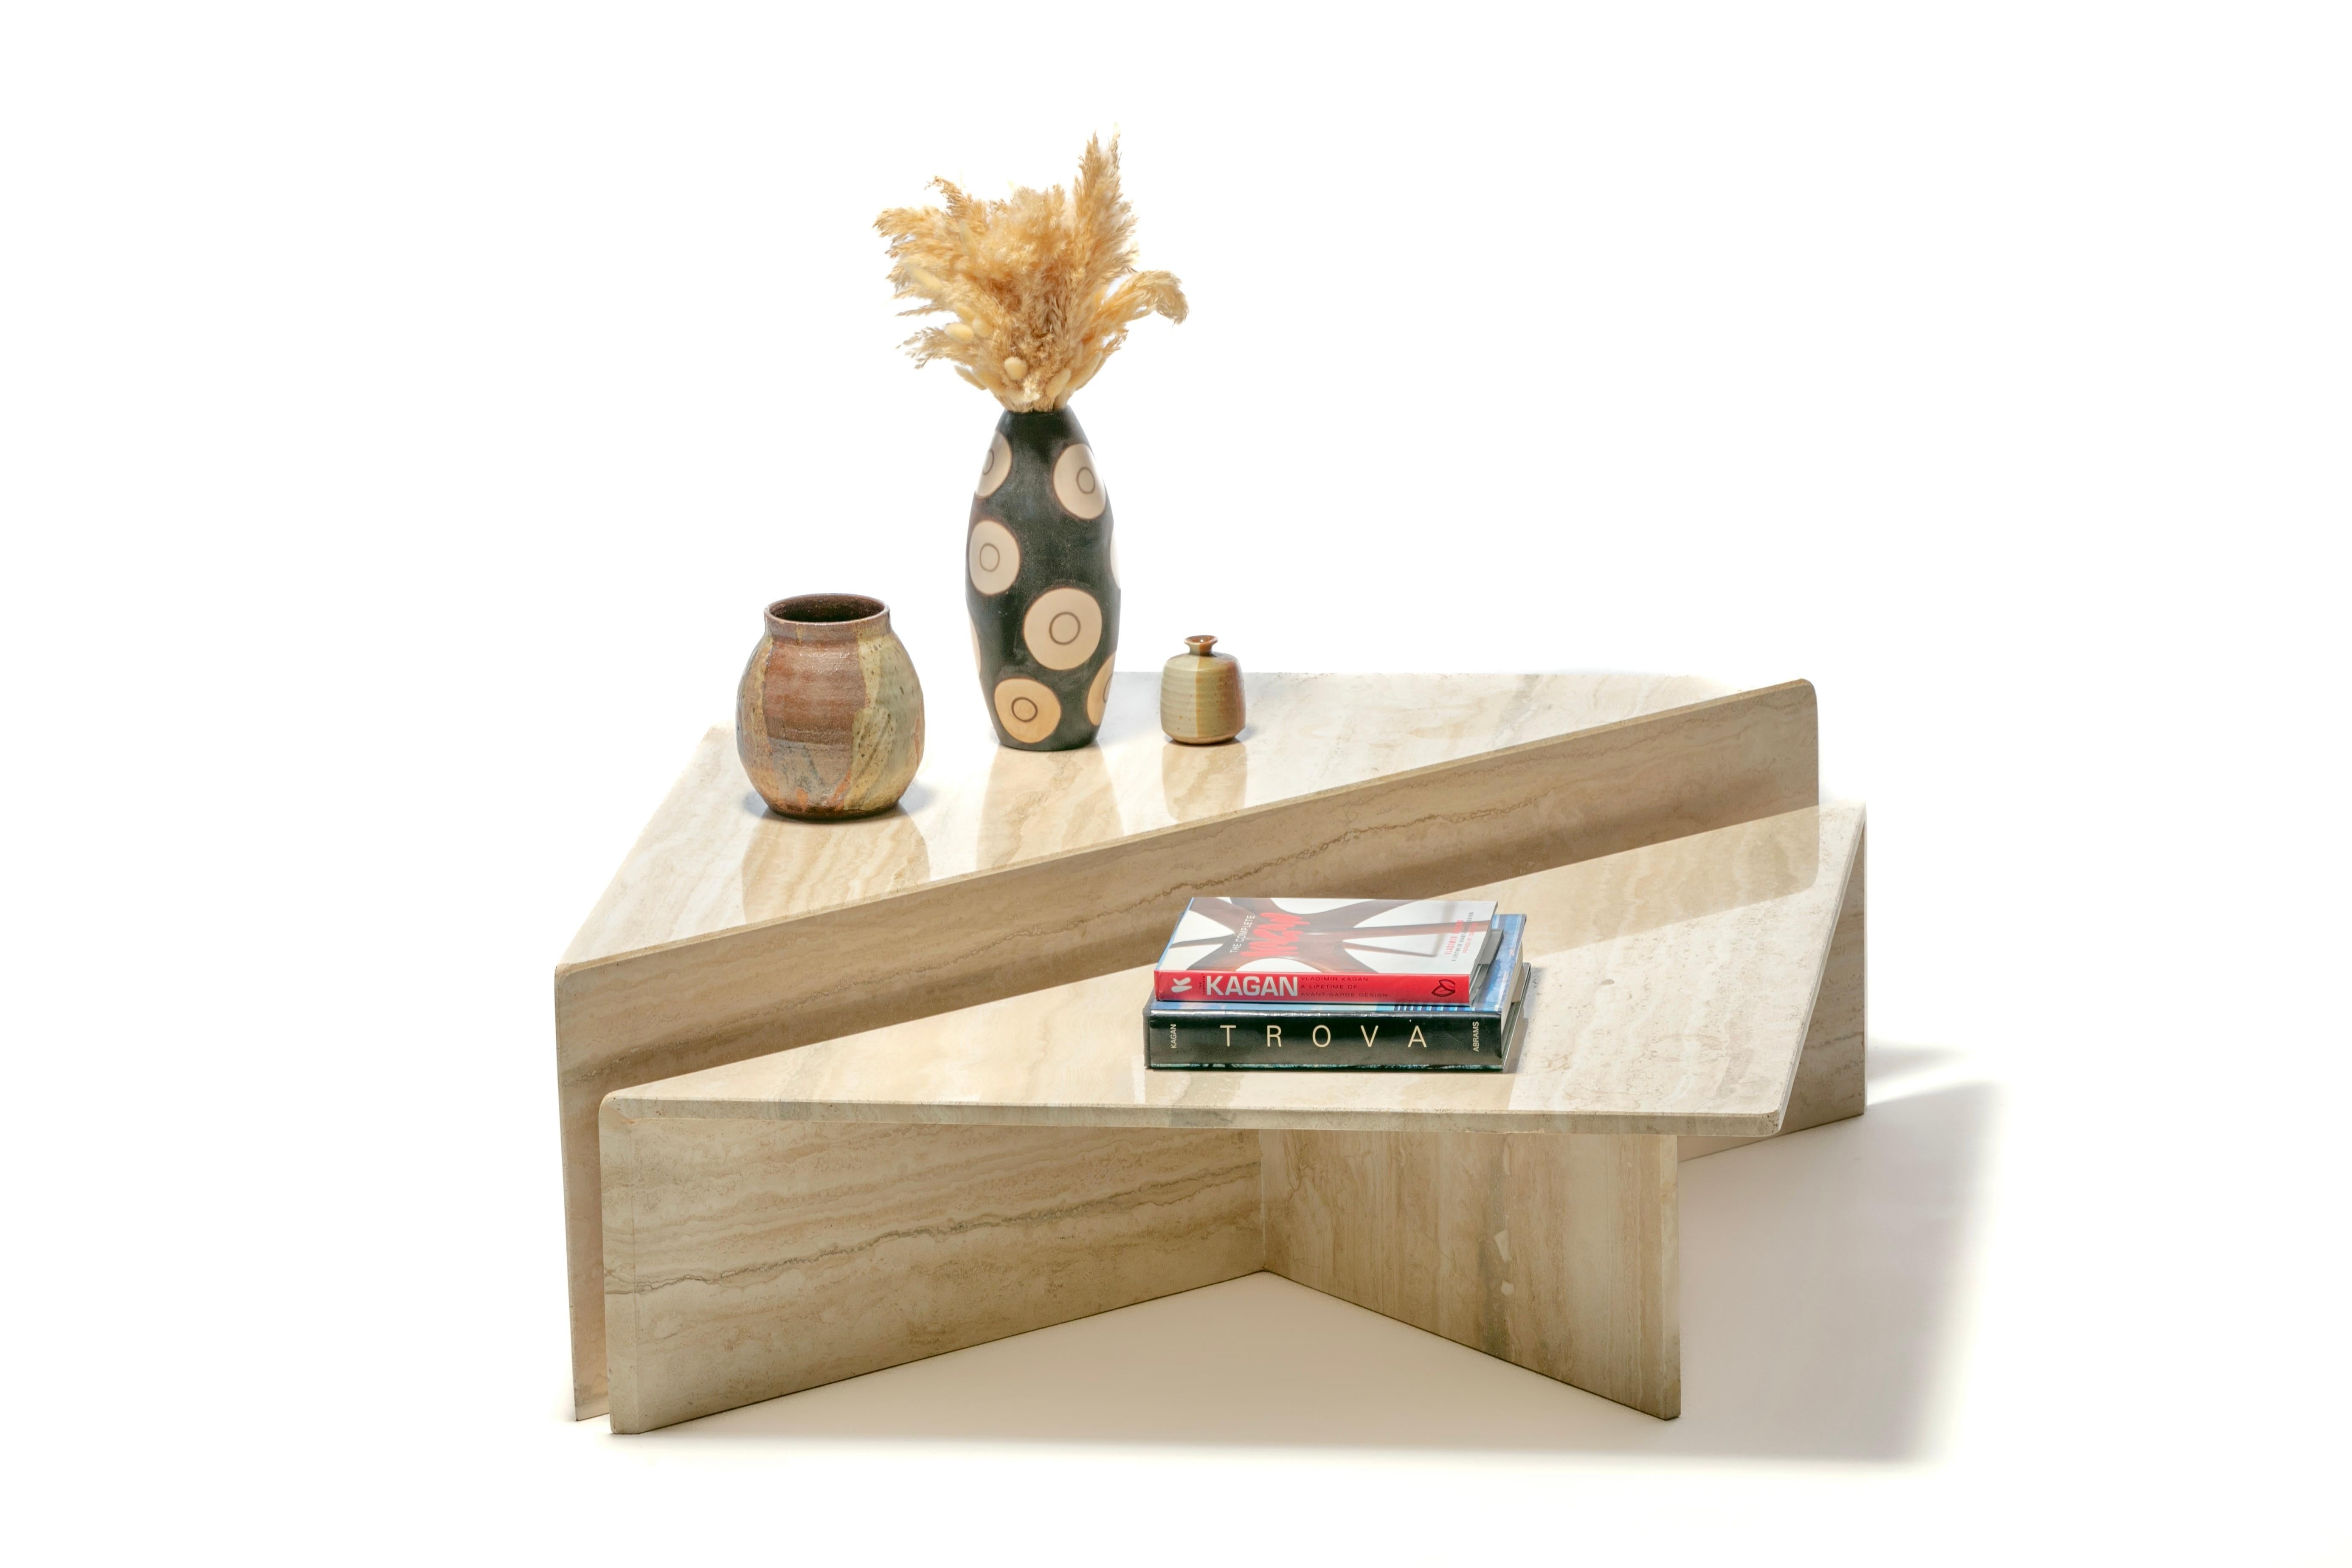 Gorgeous Italian sculptural two part modern travertine coffee tables hailing from the 1970s. Neutral. Versatile. This particular set showcases an especially beautiful travertine grain that offers a stronger contrast. The grain gently softens the